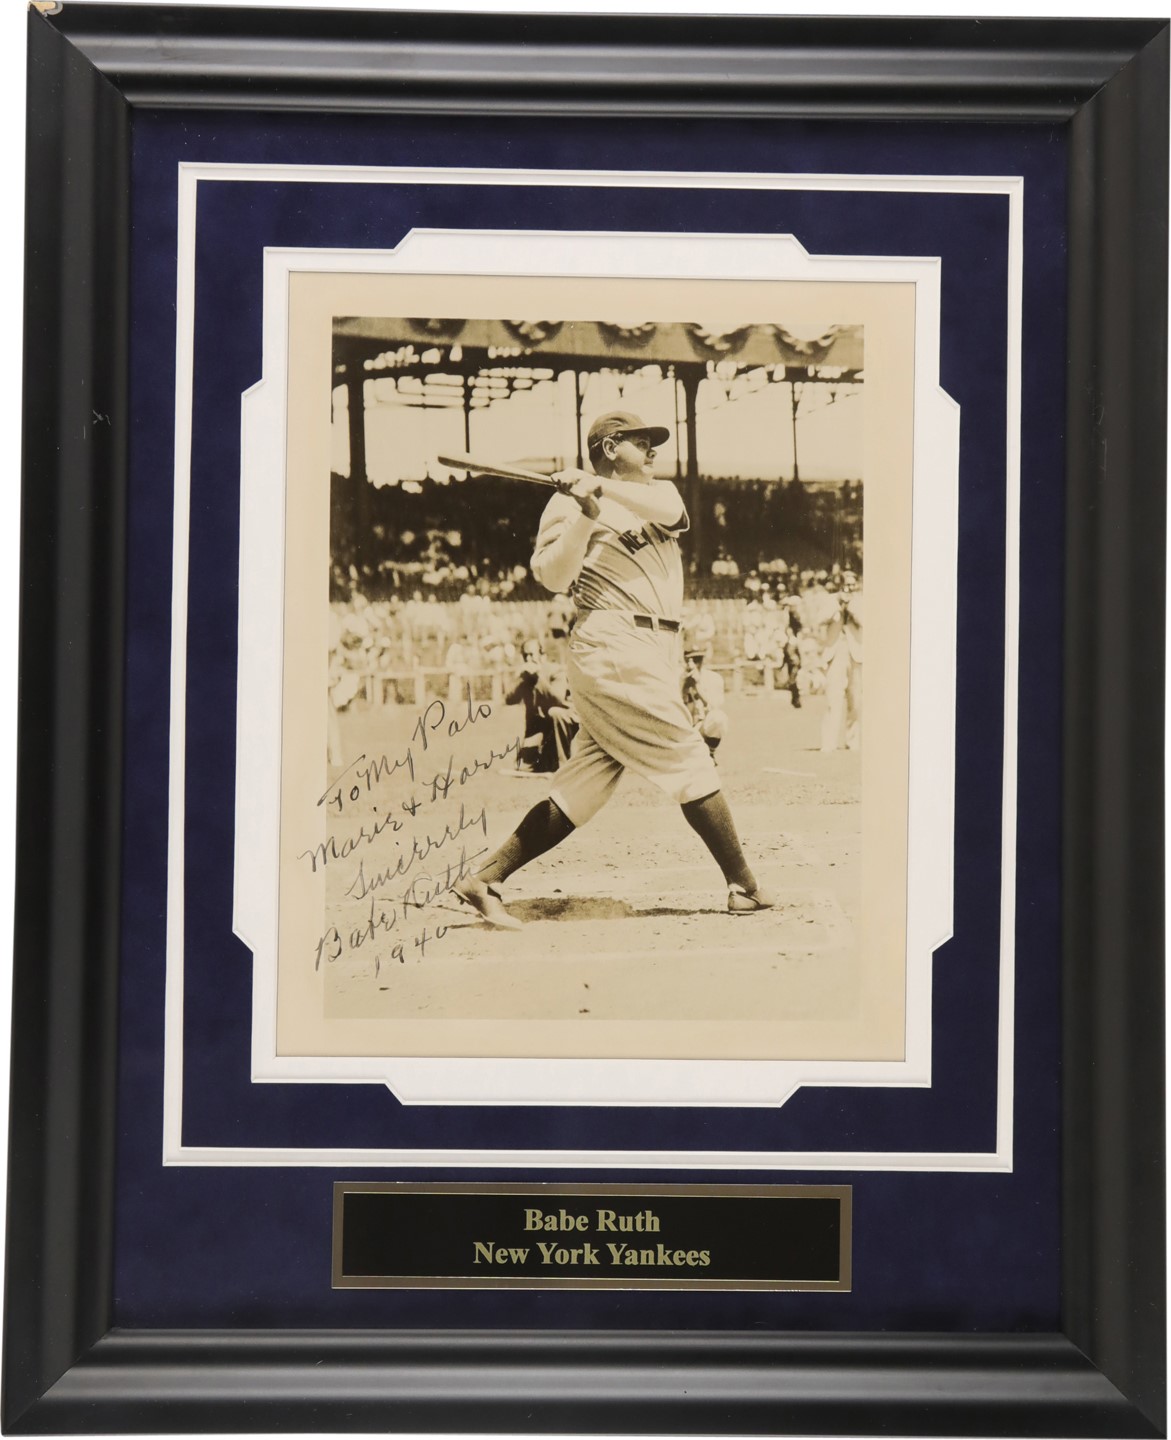 Ruth and Gehrig - Beautiful 1940 Babe Ruth Signed Photograph (PSA)